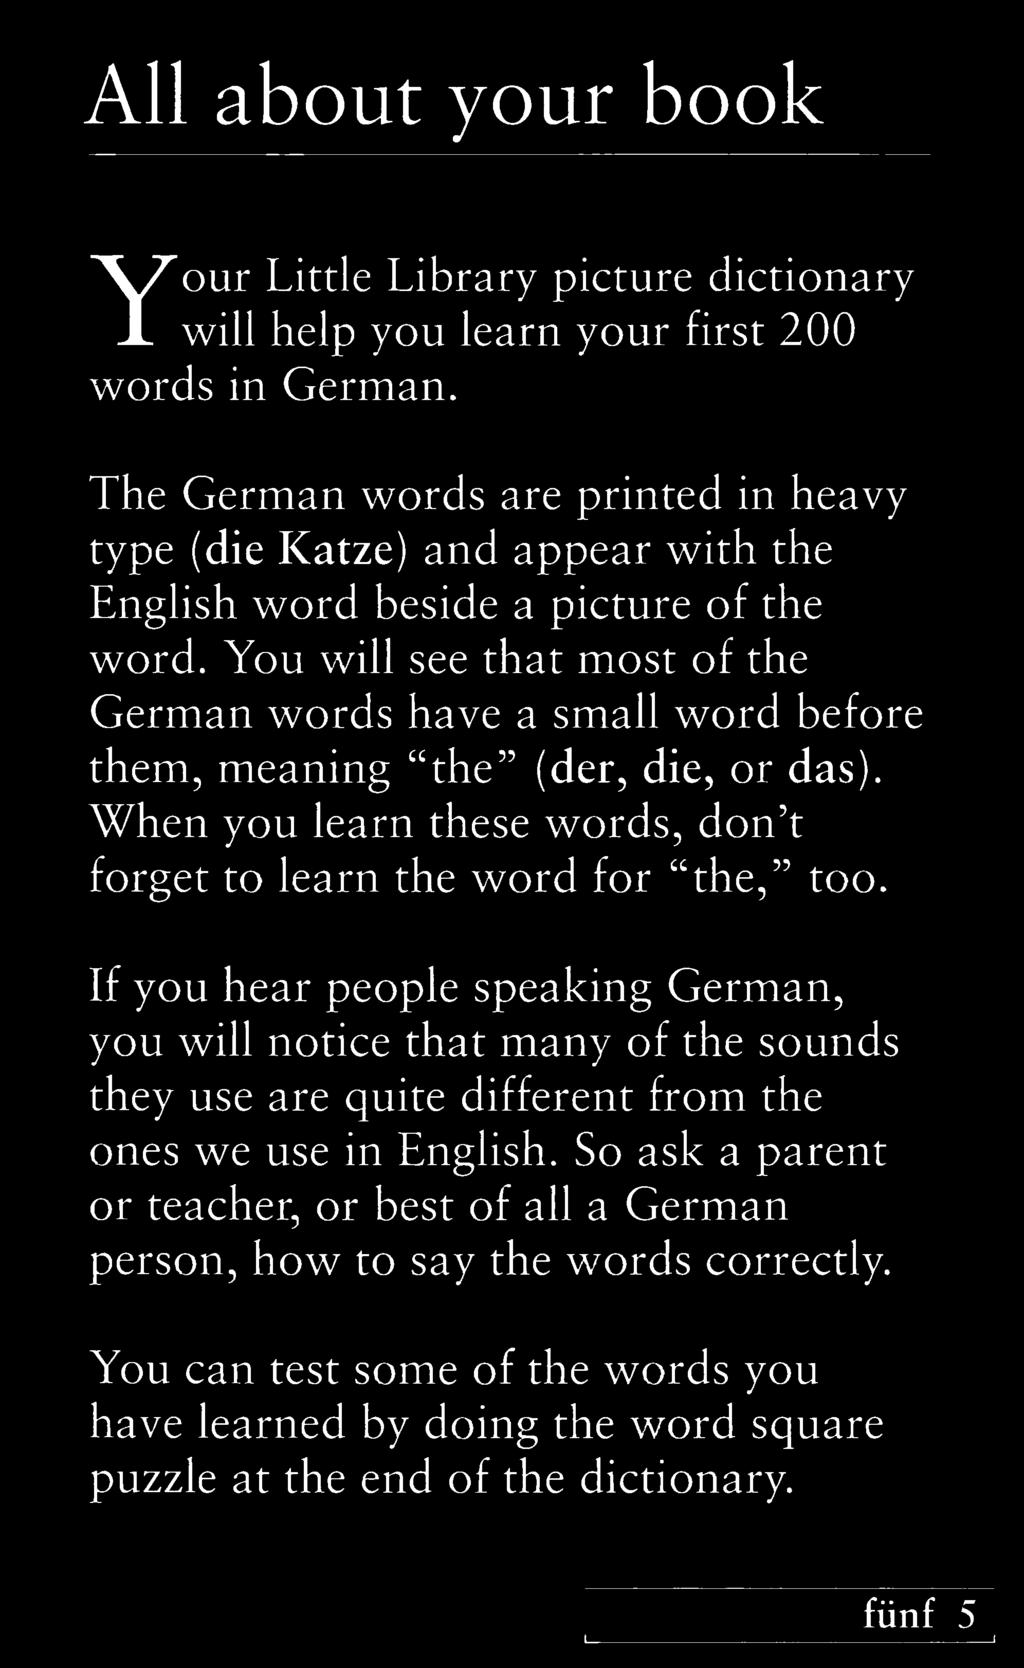 If you hear people speaking German, you will notice that many of the sounds they use are quite different from the ones we use